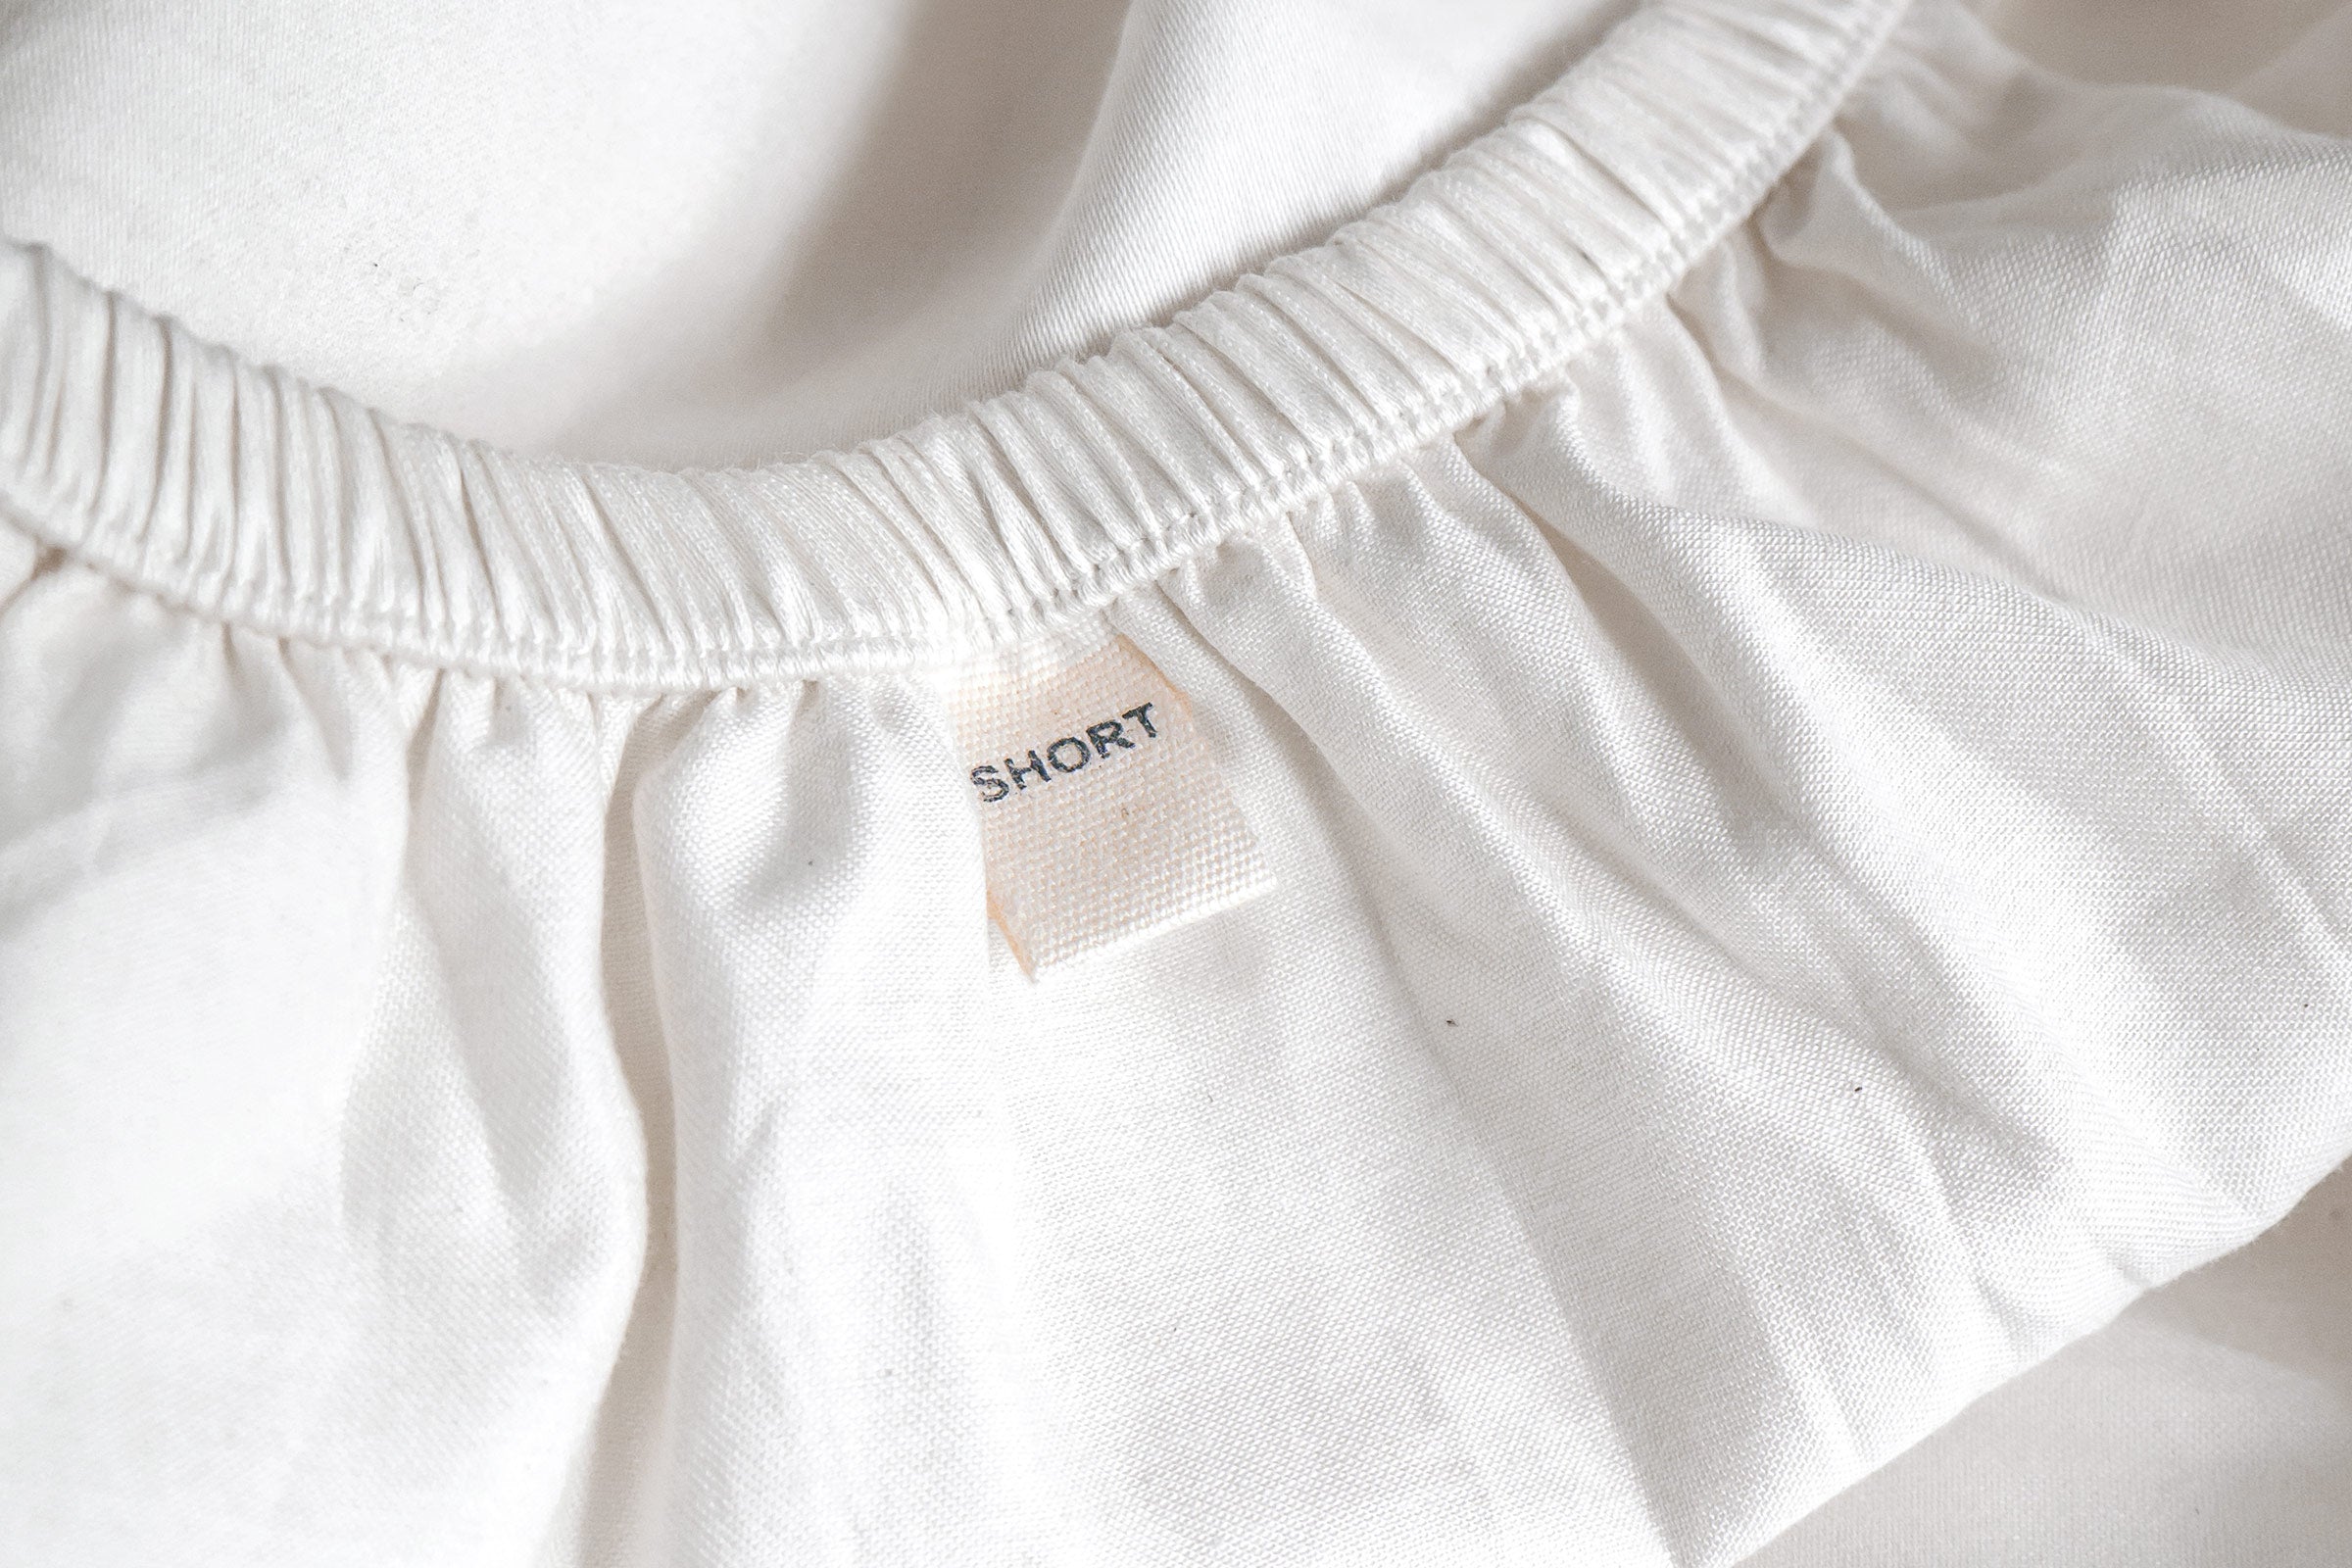 white-organic-crisp-baby-cot-fitted-sheet-close-up-shot-of-short-side-label-by-sojao.jpg